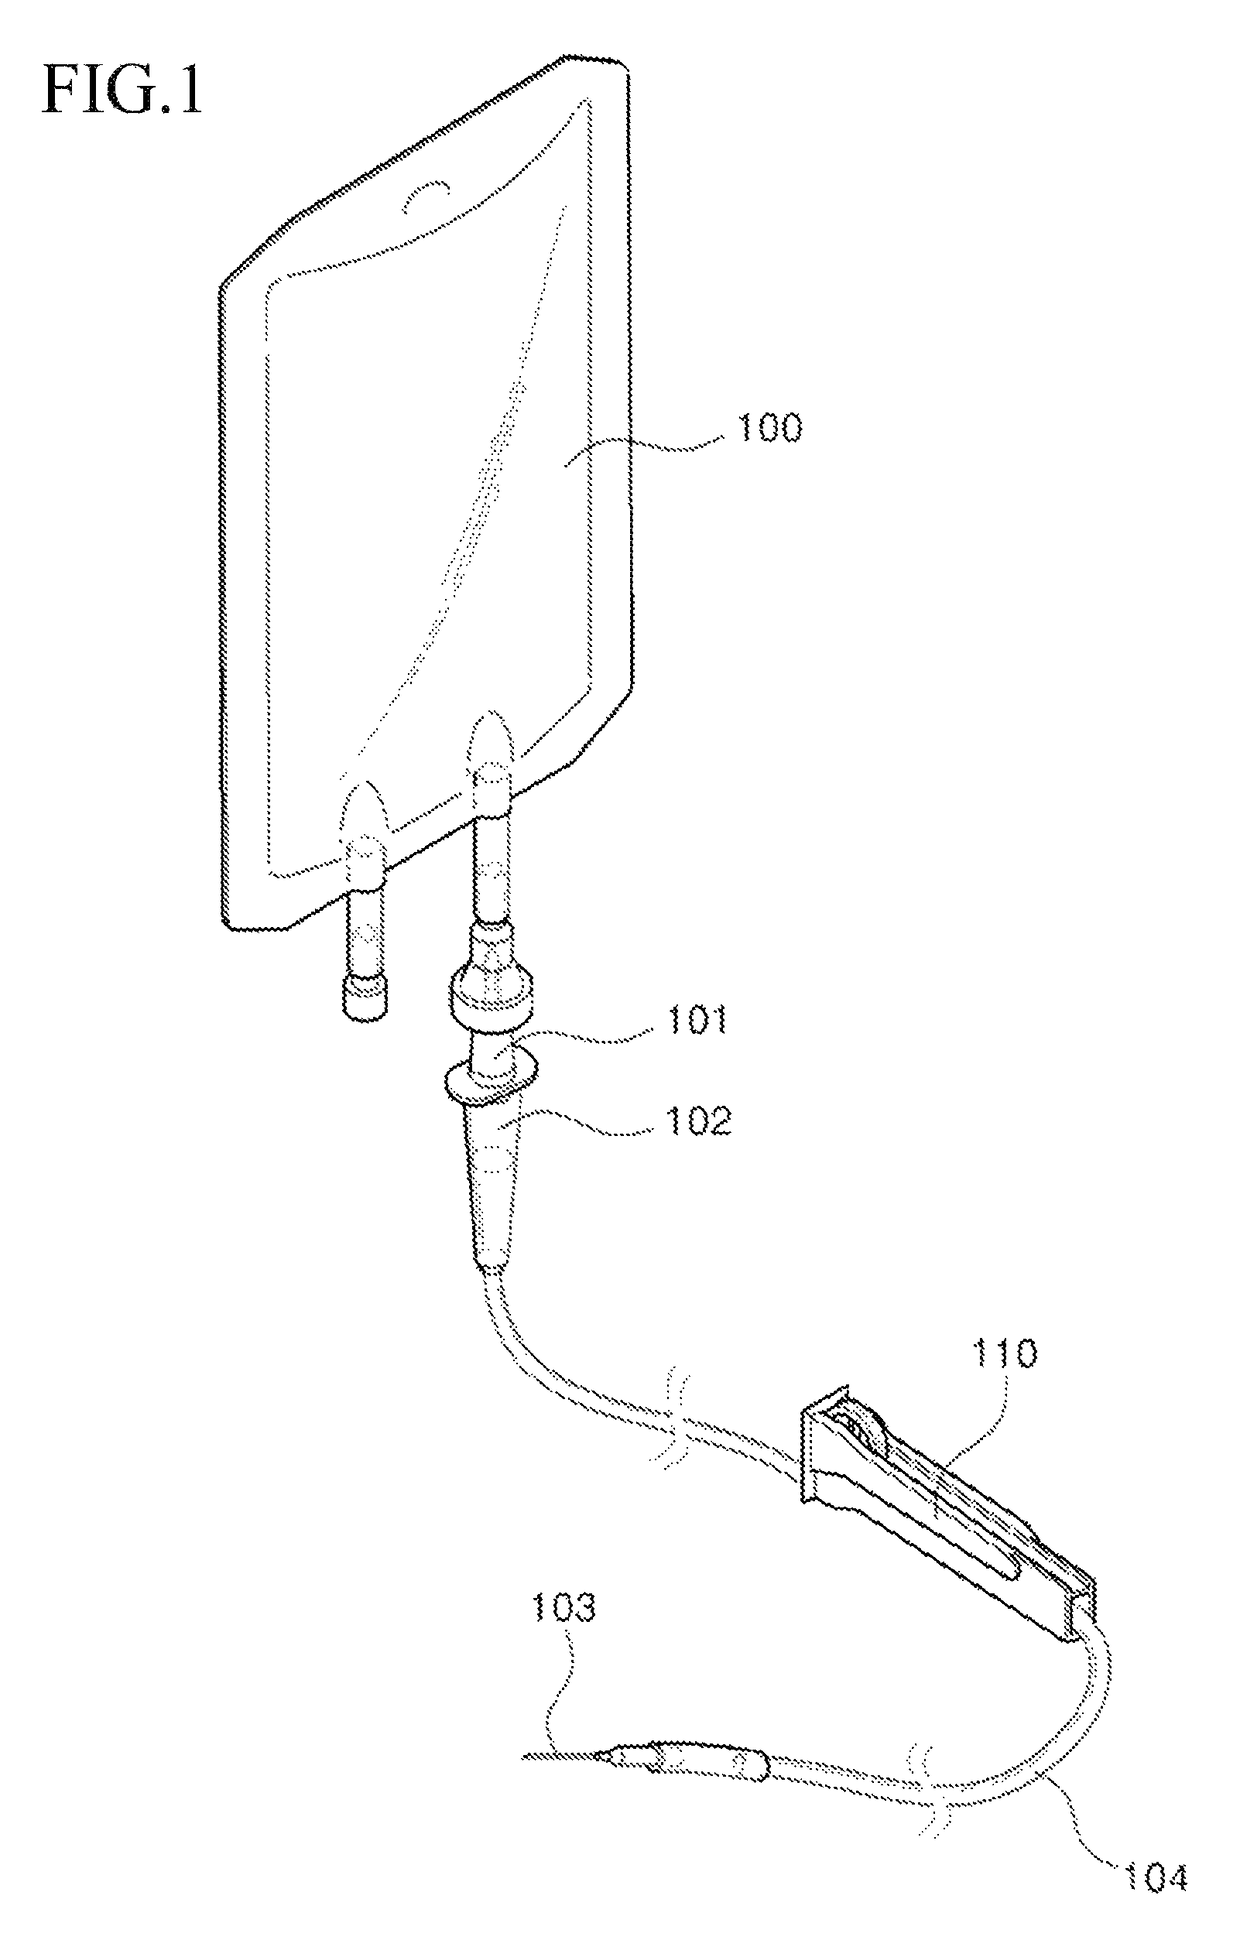 Linear flow regulating apparatus for intravenous infusion